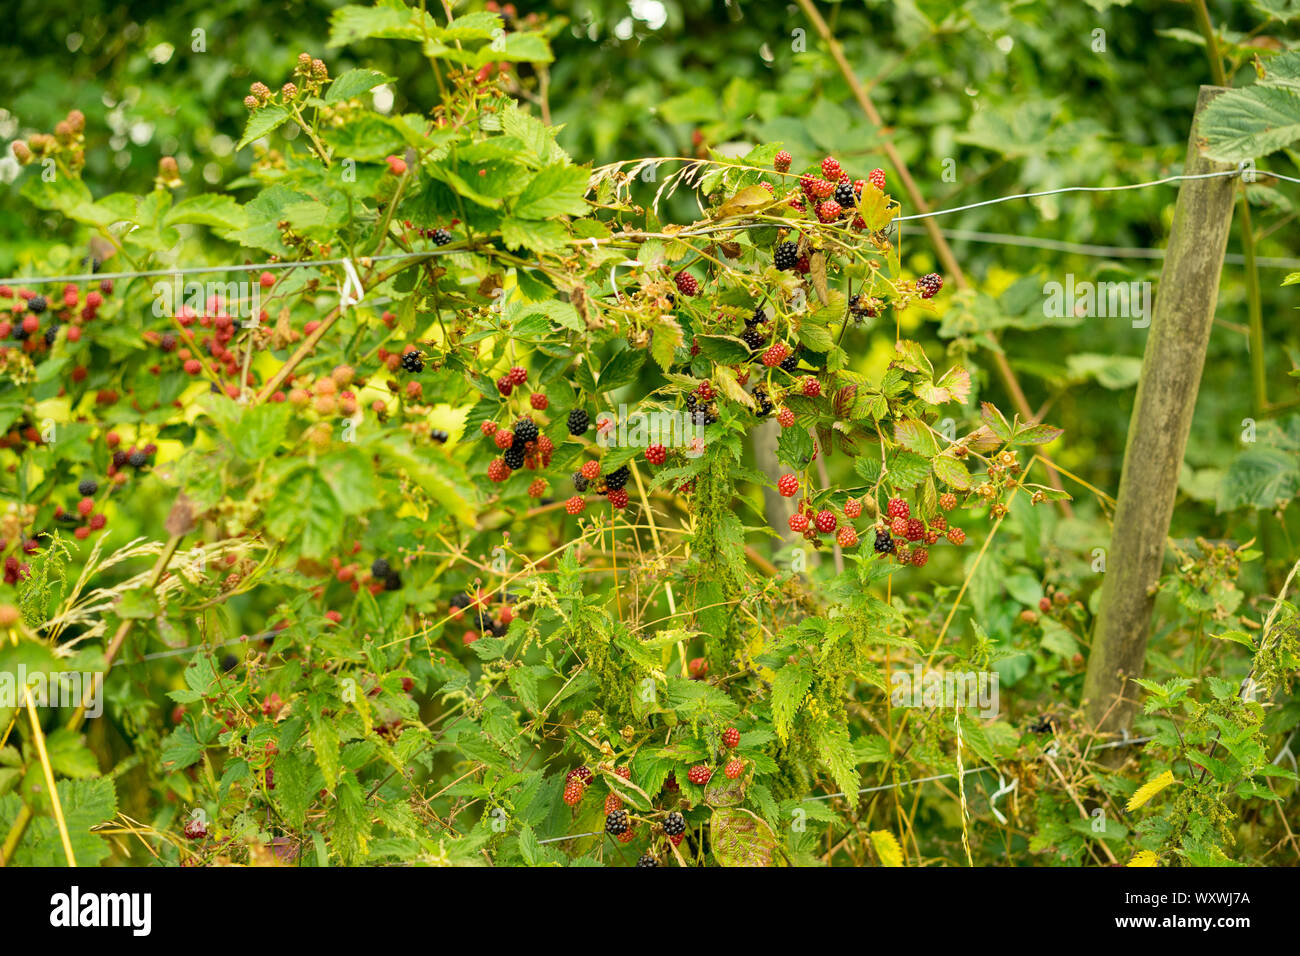 Ripening Cultivated Blackberries in Somerset Orchard, England, UK. Stock Photo